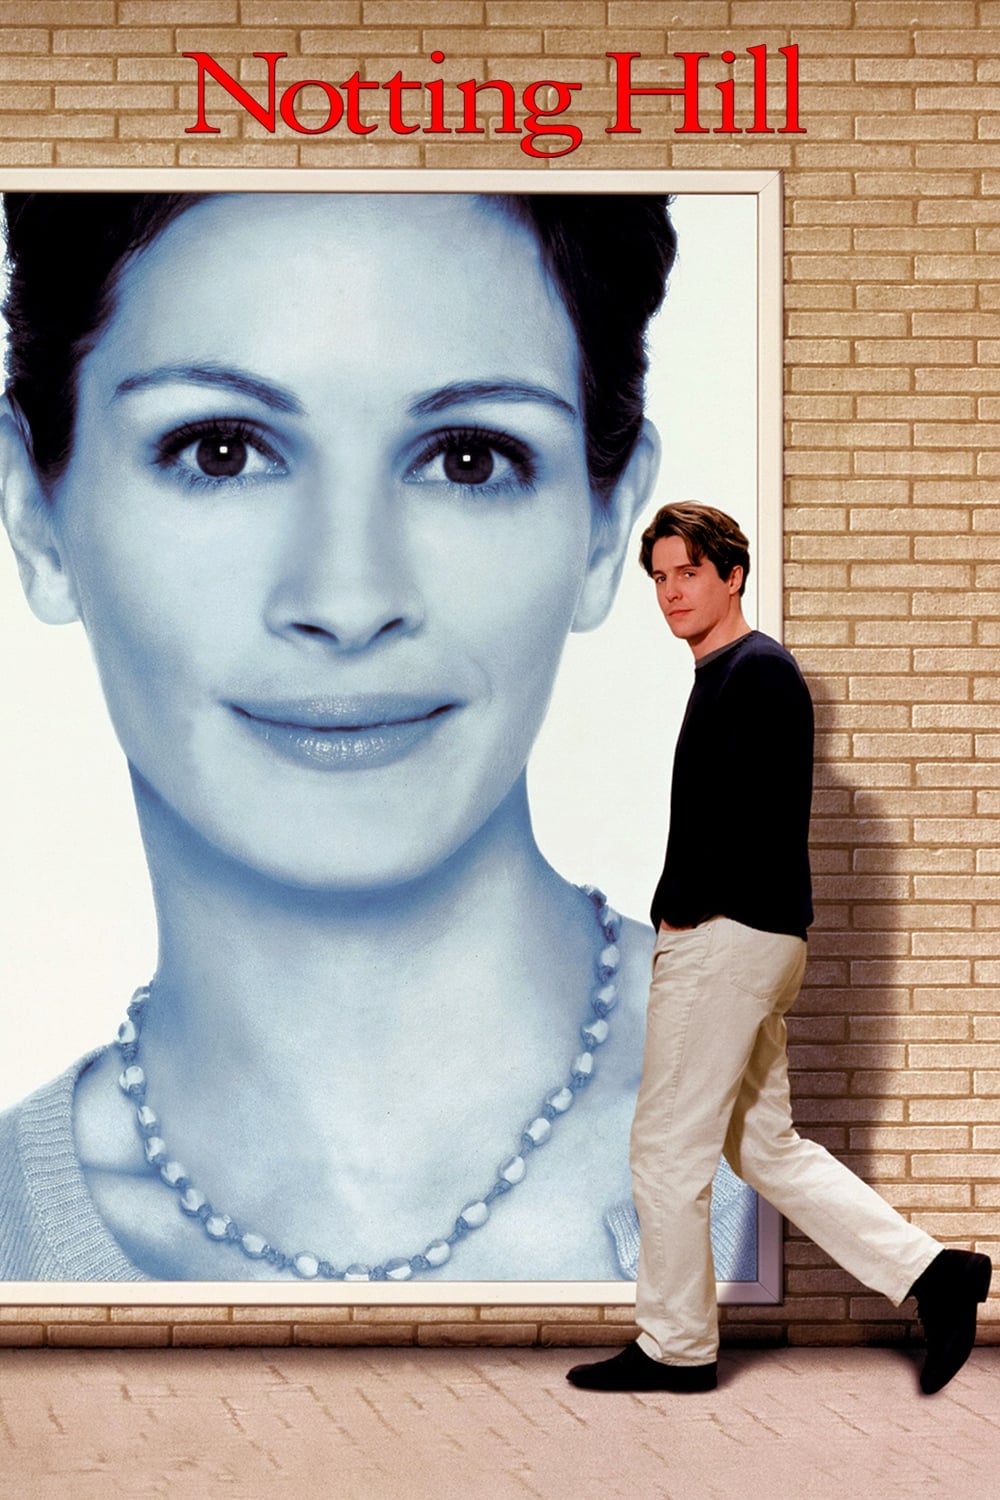 Notting Hill Movie poster